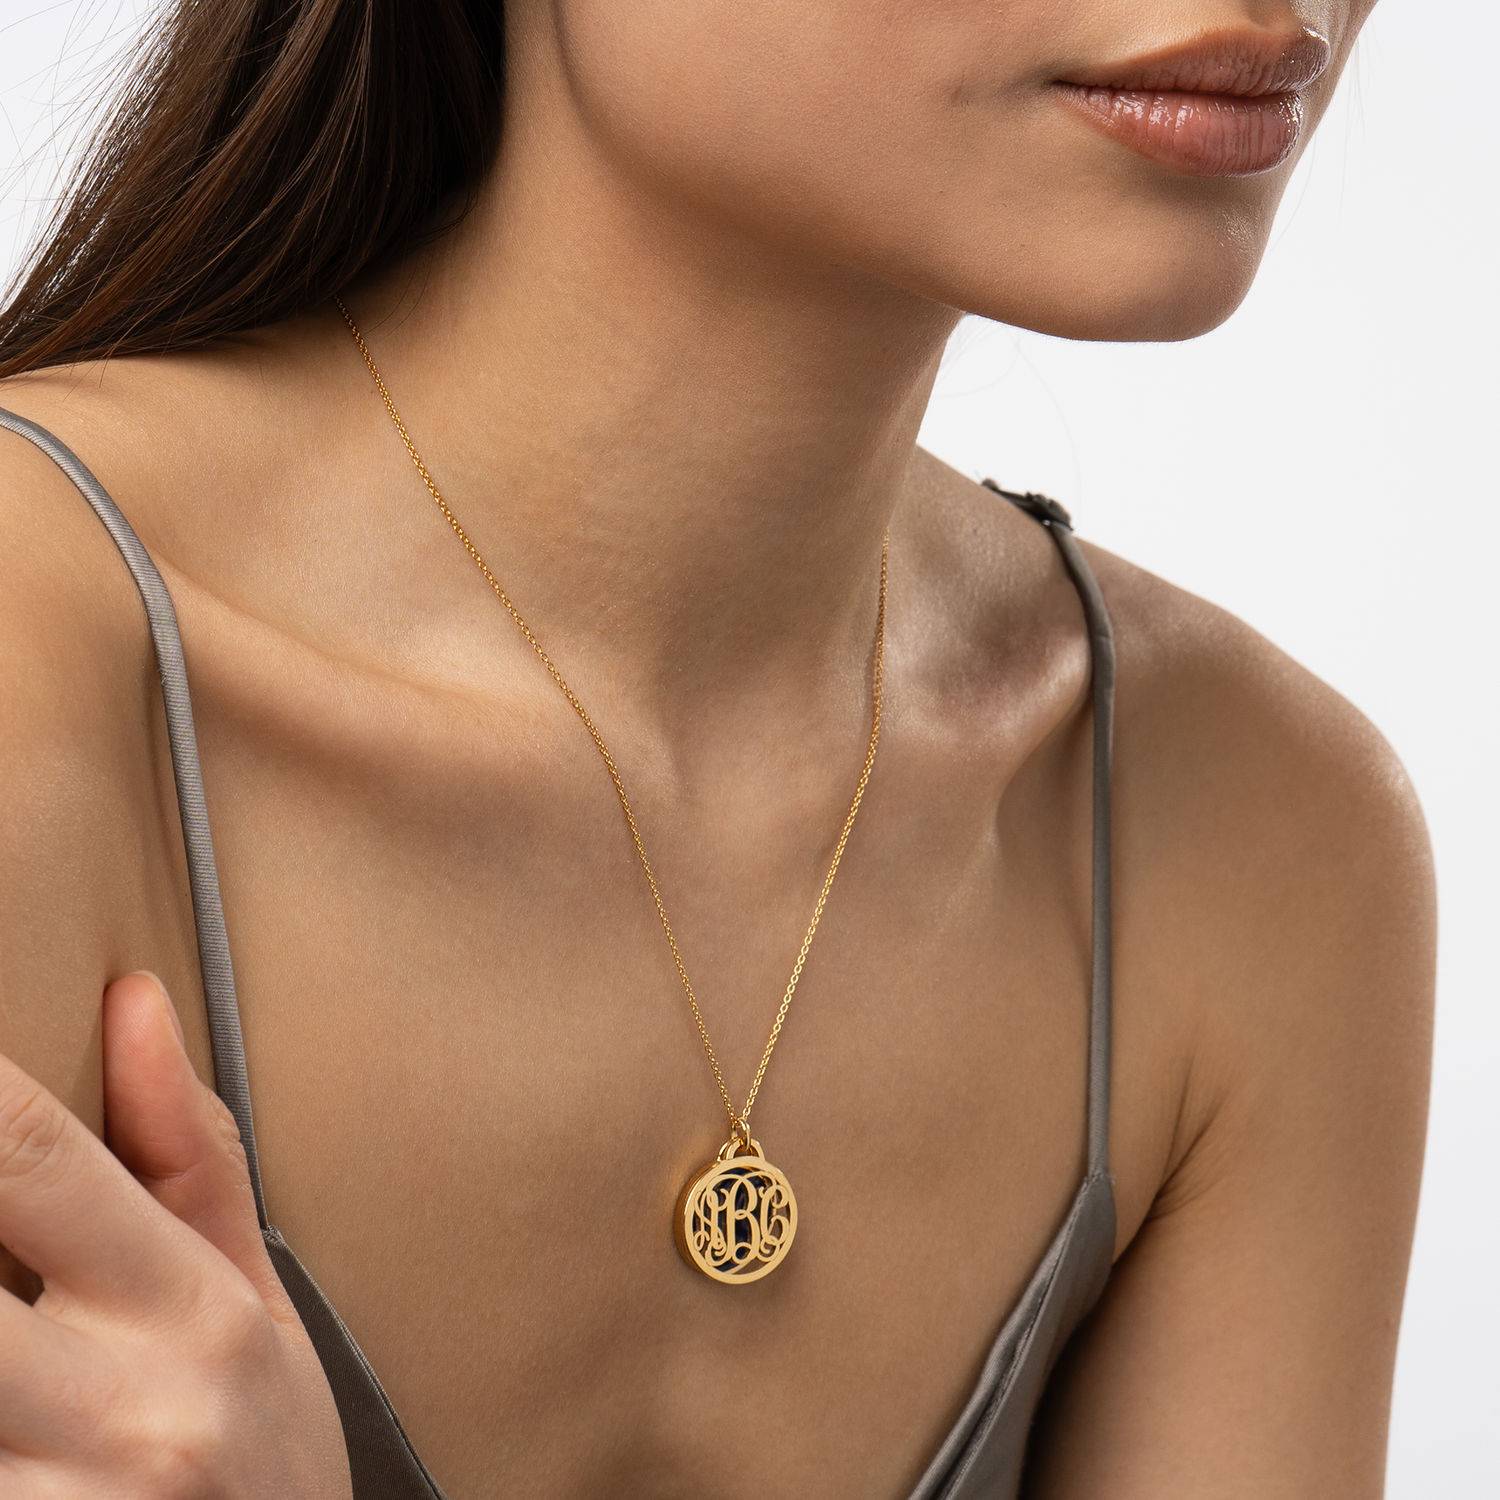 Monogram Necklace With Semi-Precious Stone in 18K Gold Vermeil-4 product photo